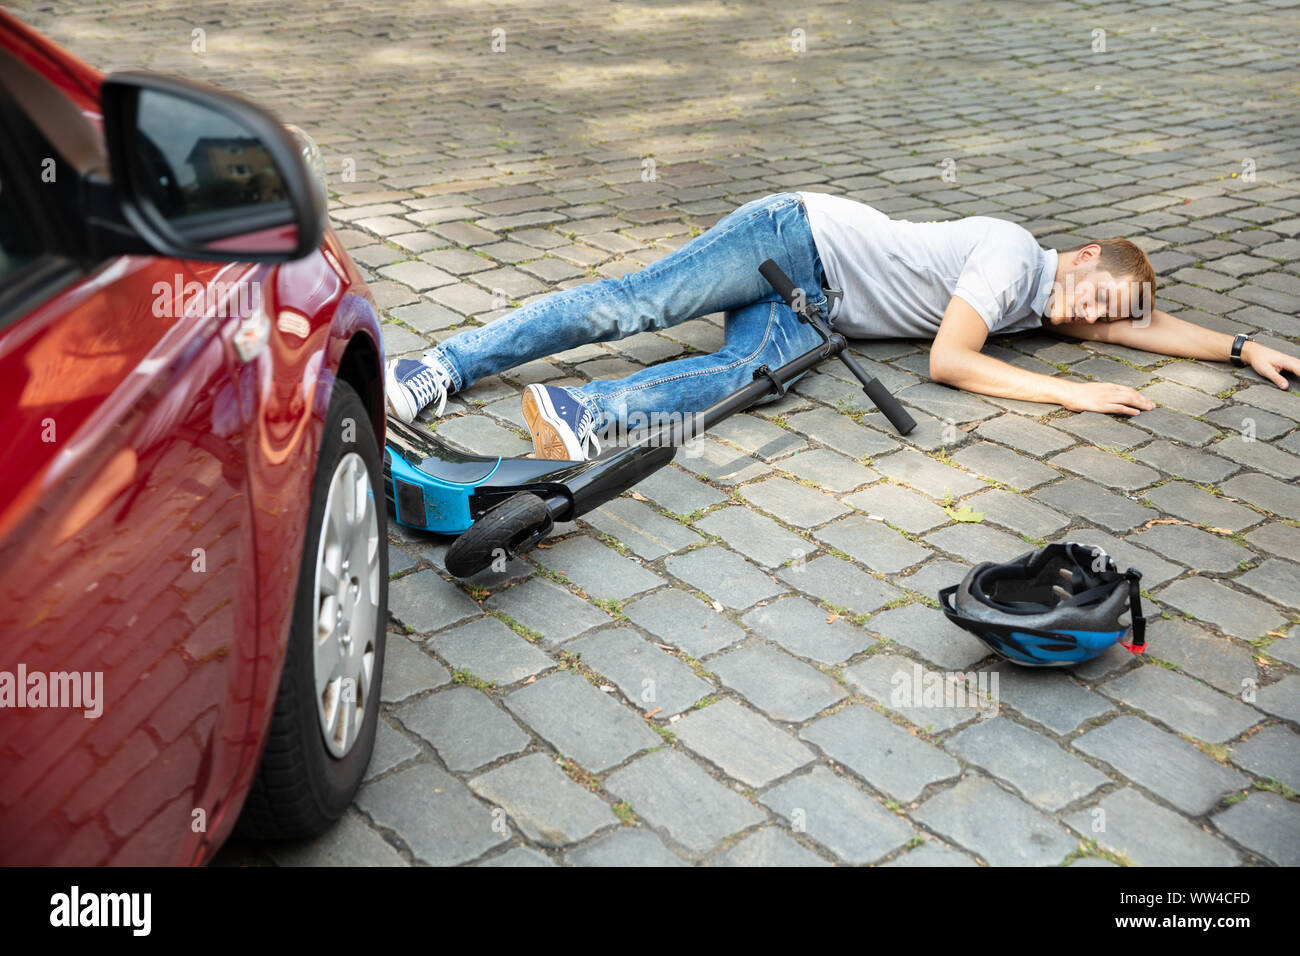 Man After Accident On Electric Scooter Overrun By Car Stock Photo